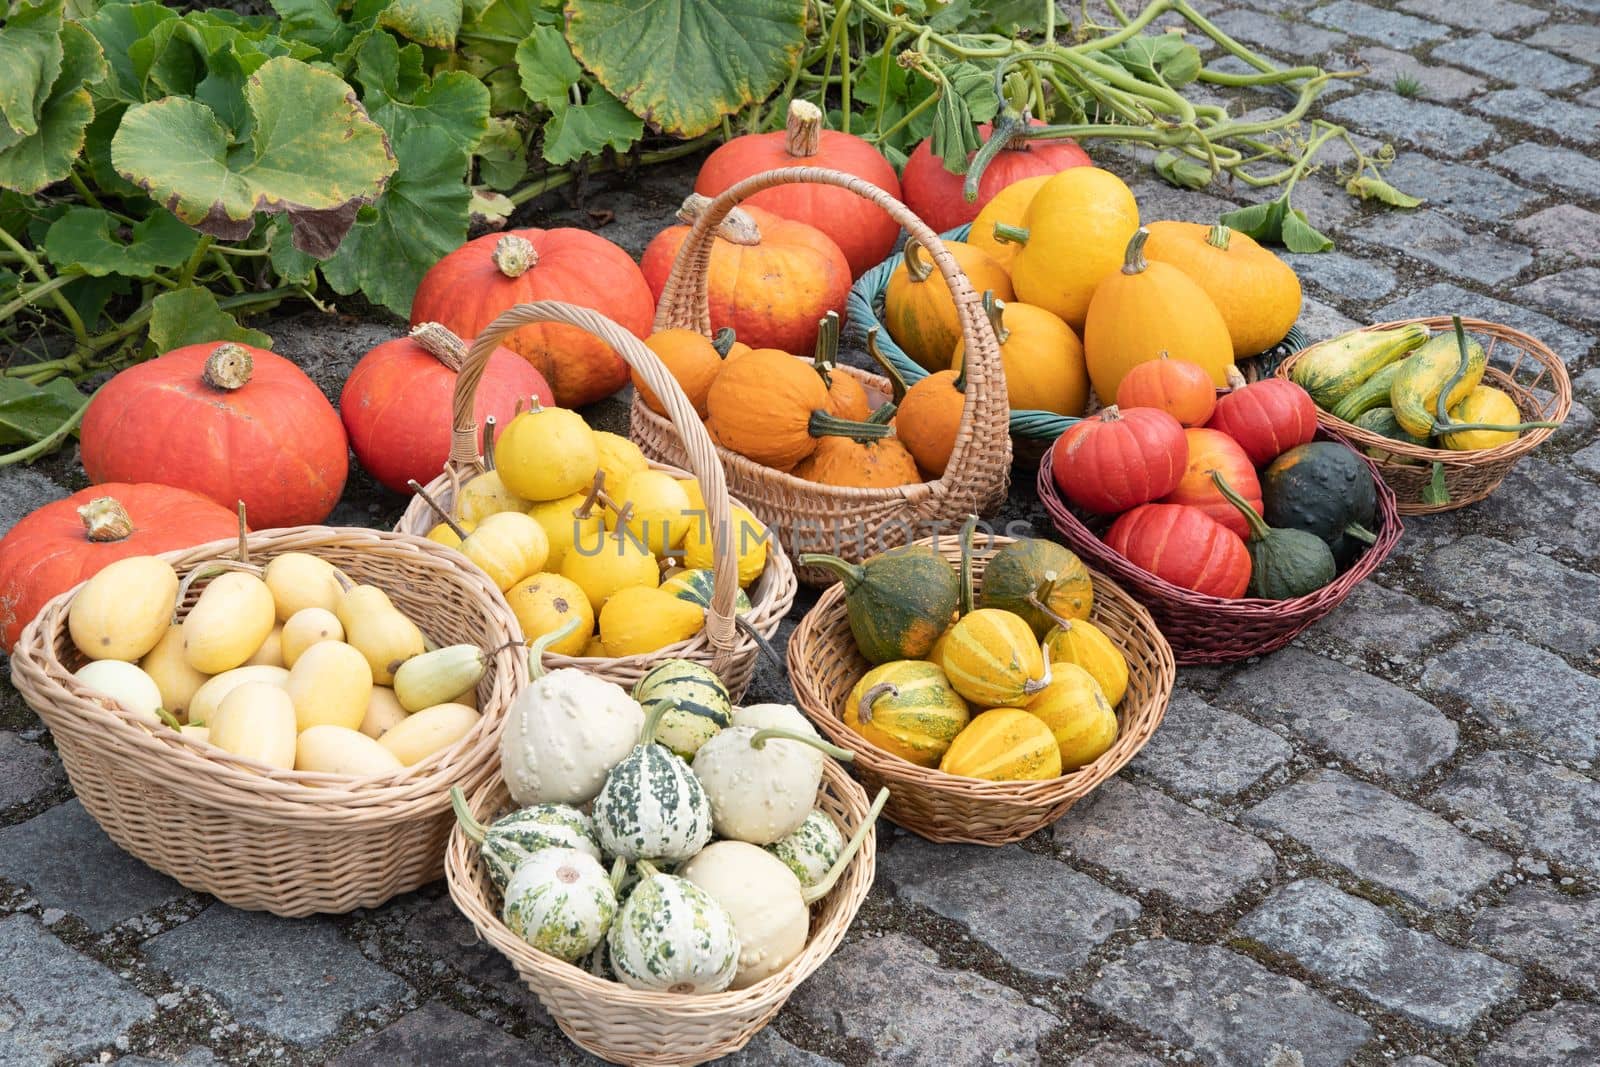 a large harvest of bright multi-colored pumpkins in the garden, vegetables by KaterinaDalemans